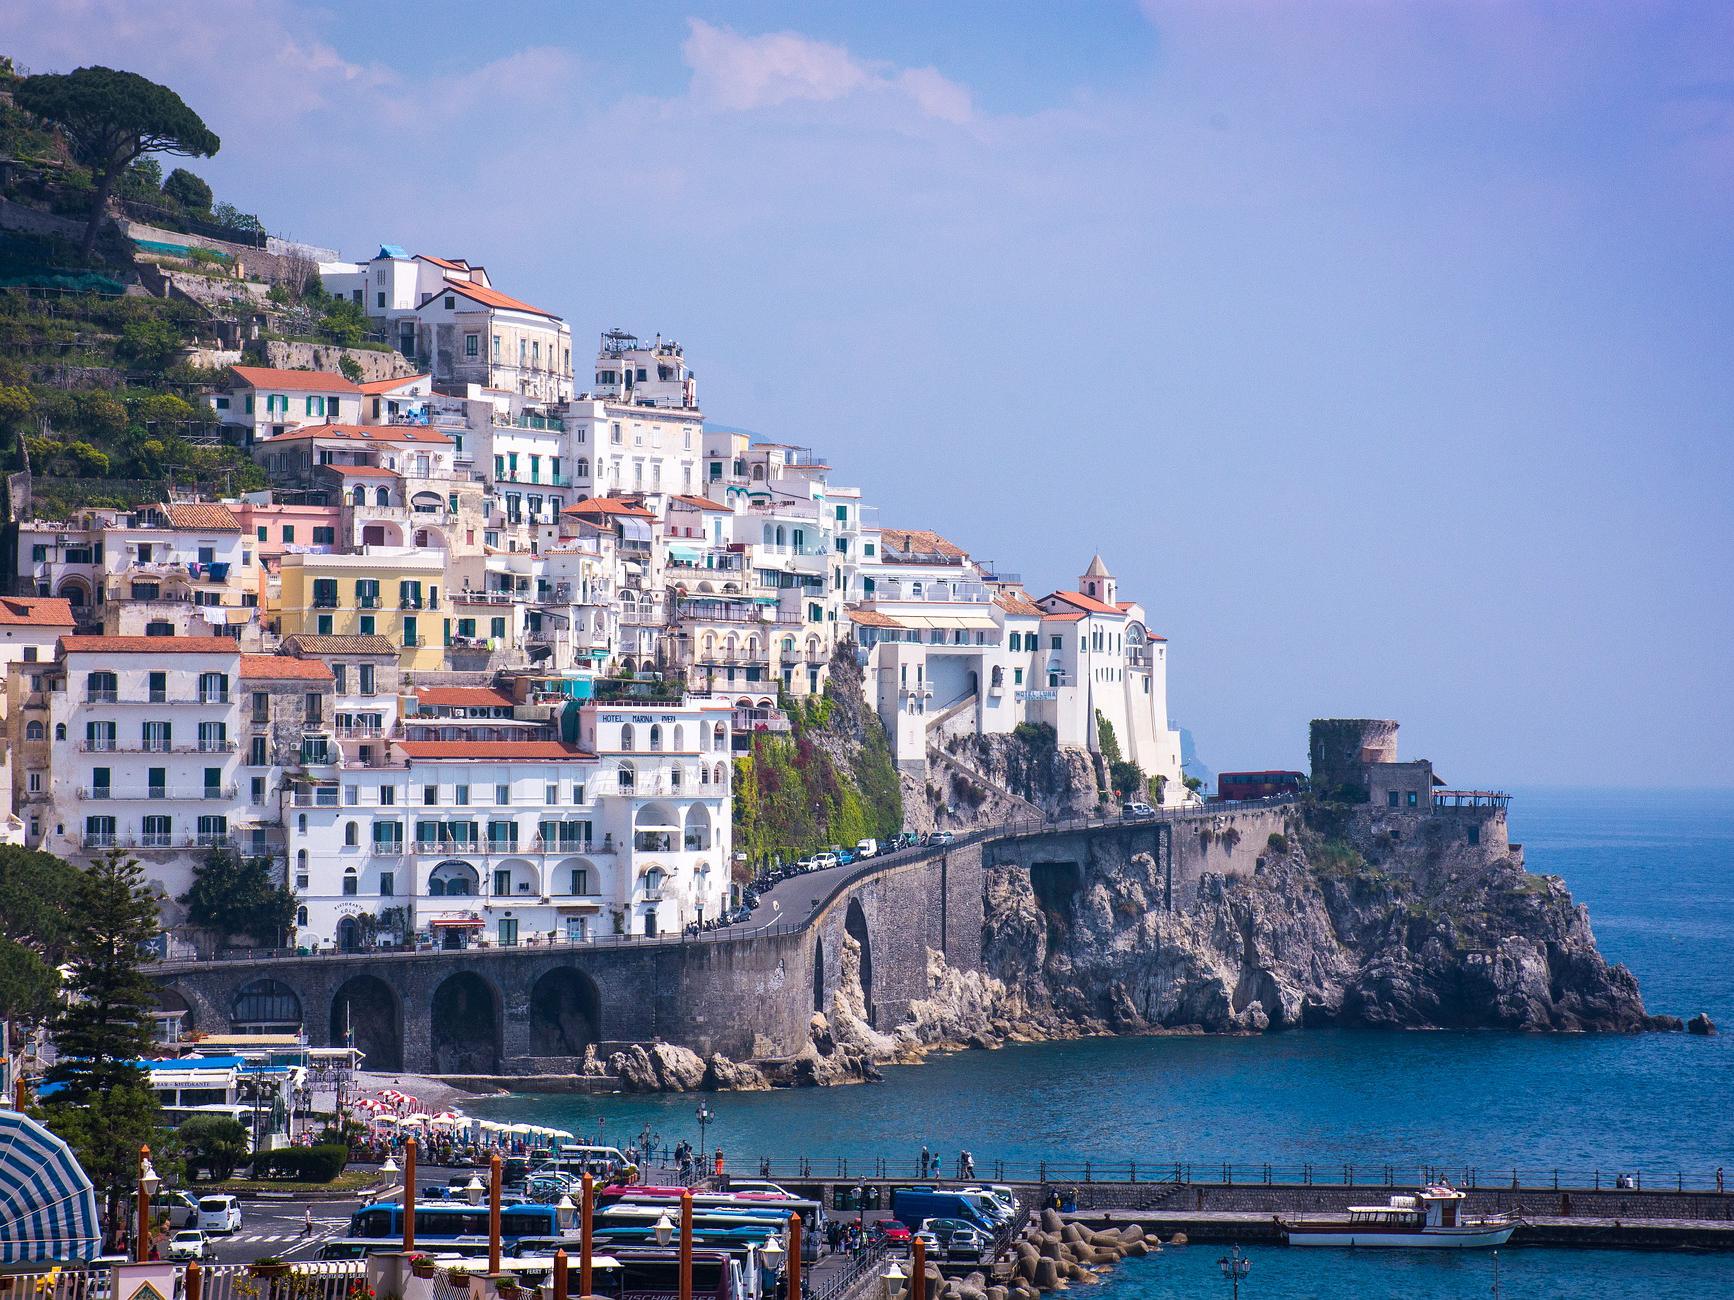 The Amalfi Coast is beautiful, but check that attractions and hotels are open if travelling there during winter